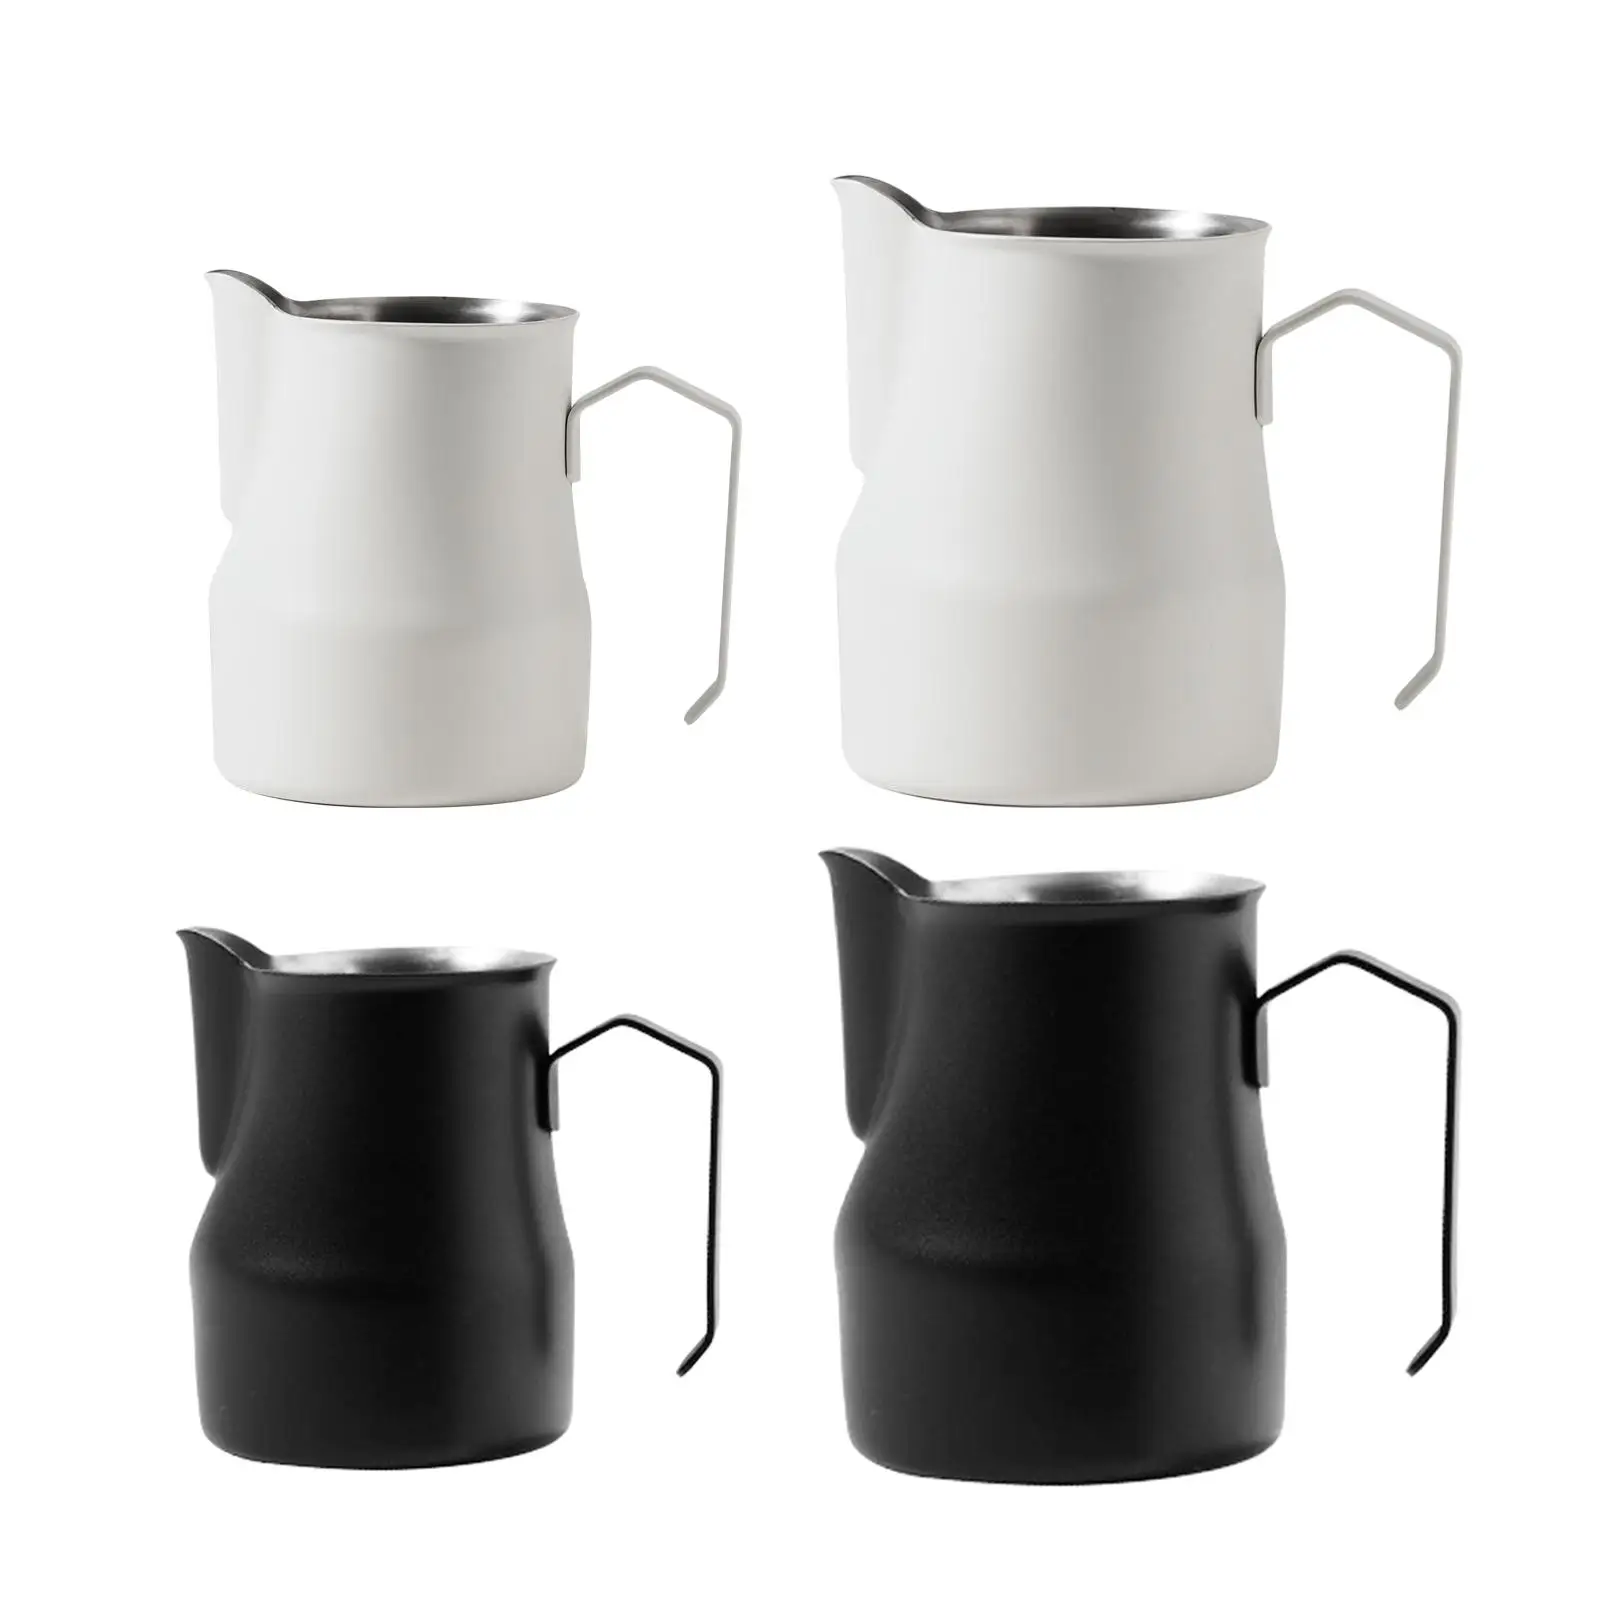 

Coffee Milk Frother Cup Dripless Spout Barista Tool Espresso Steaming Pitcher for Latte Art Cappuccino Bar Shop Hot Chocolate